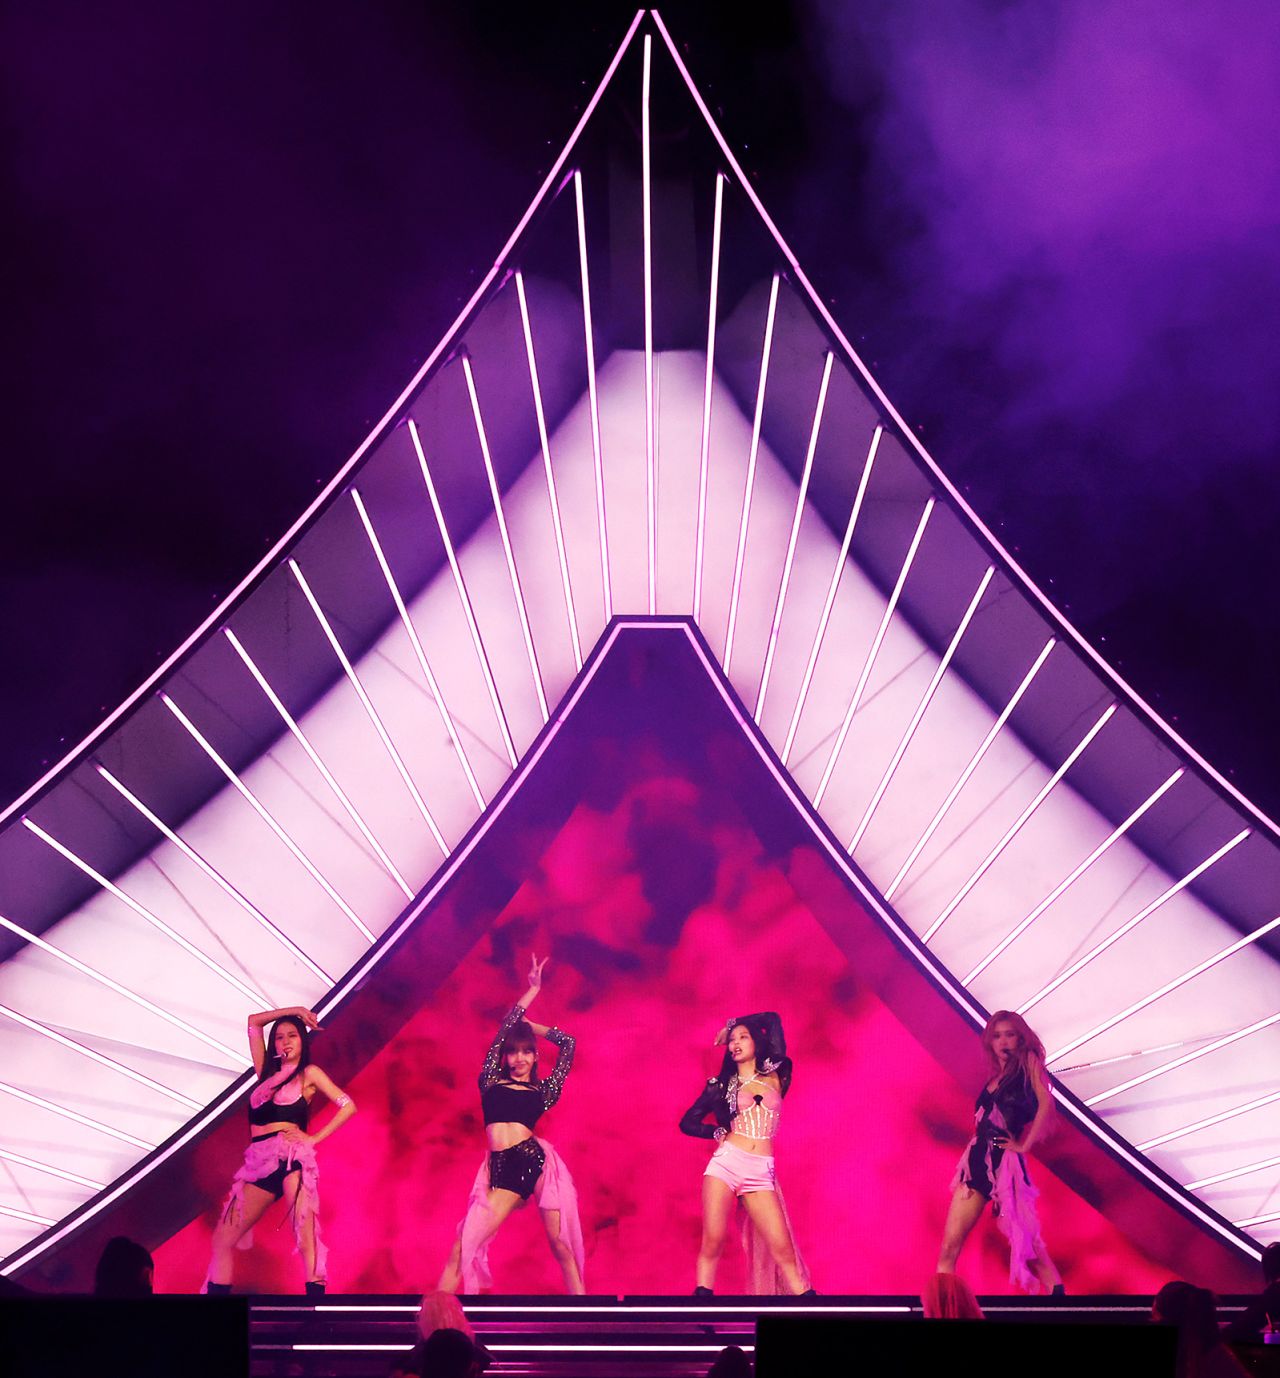 The stage design was another acknowledgement of Korean heritage.